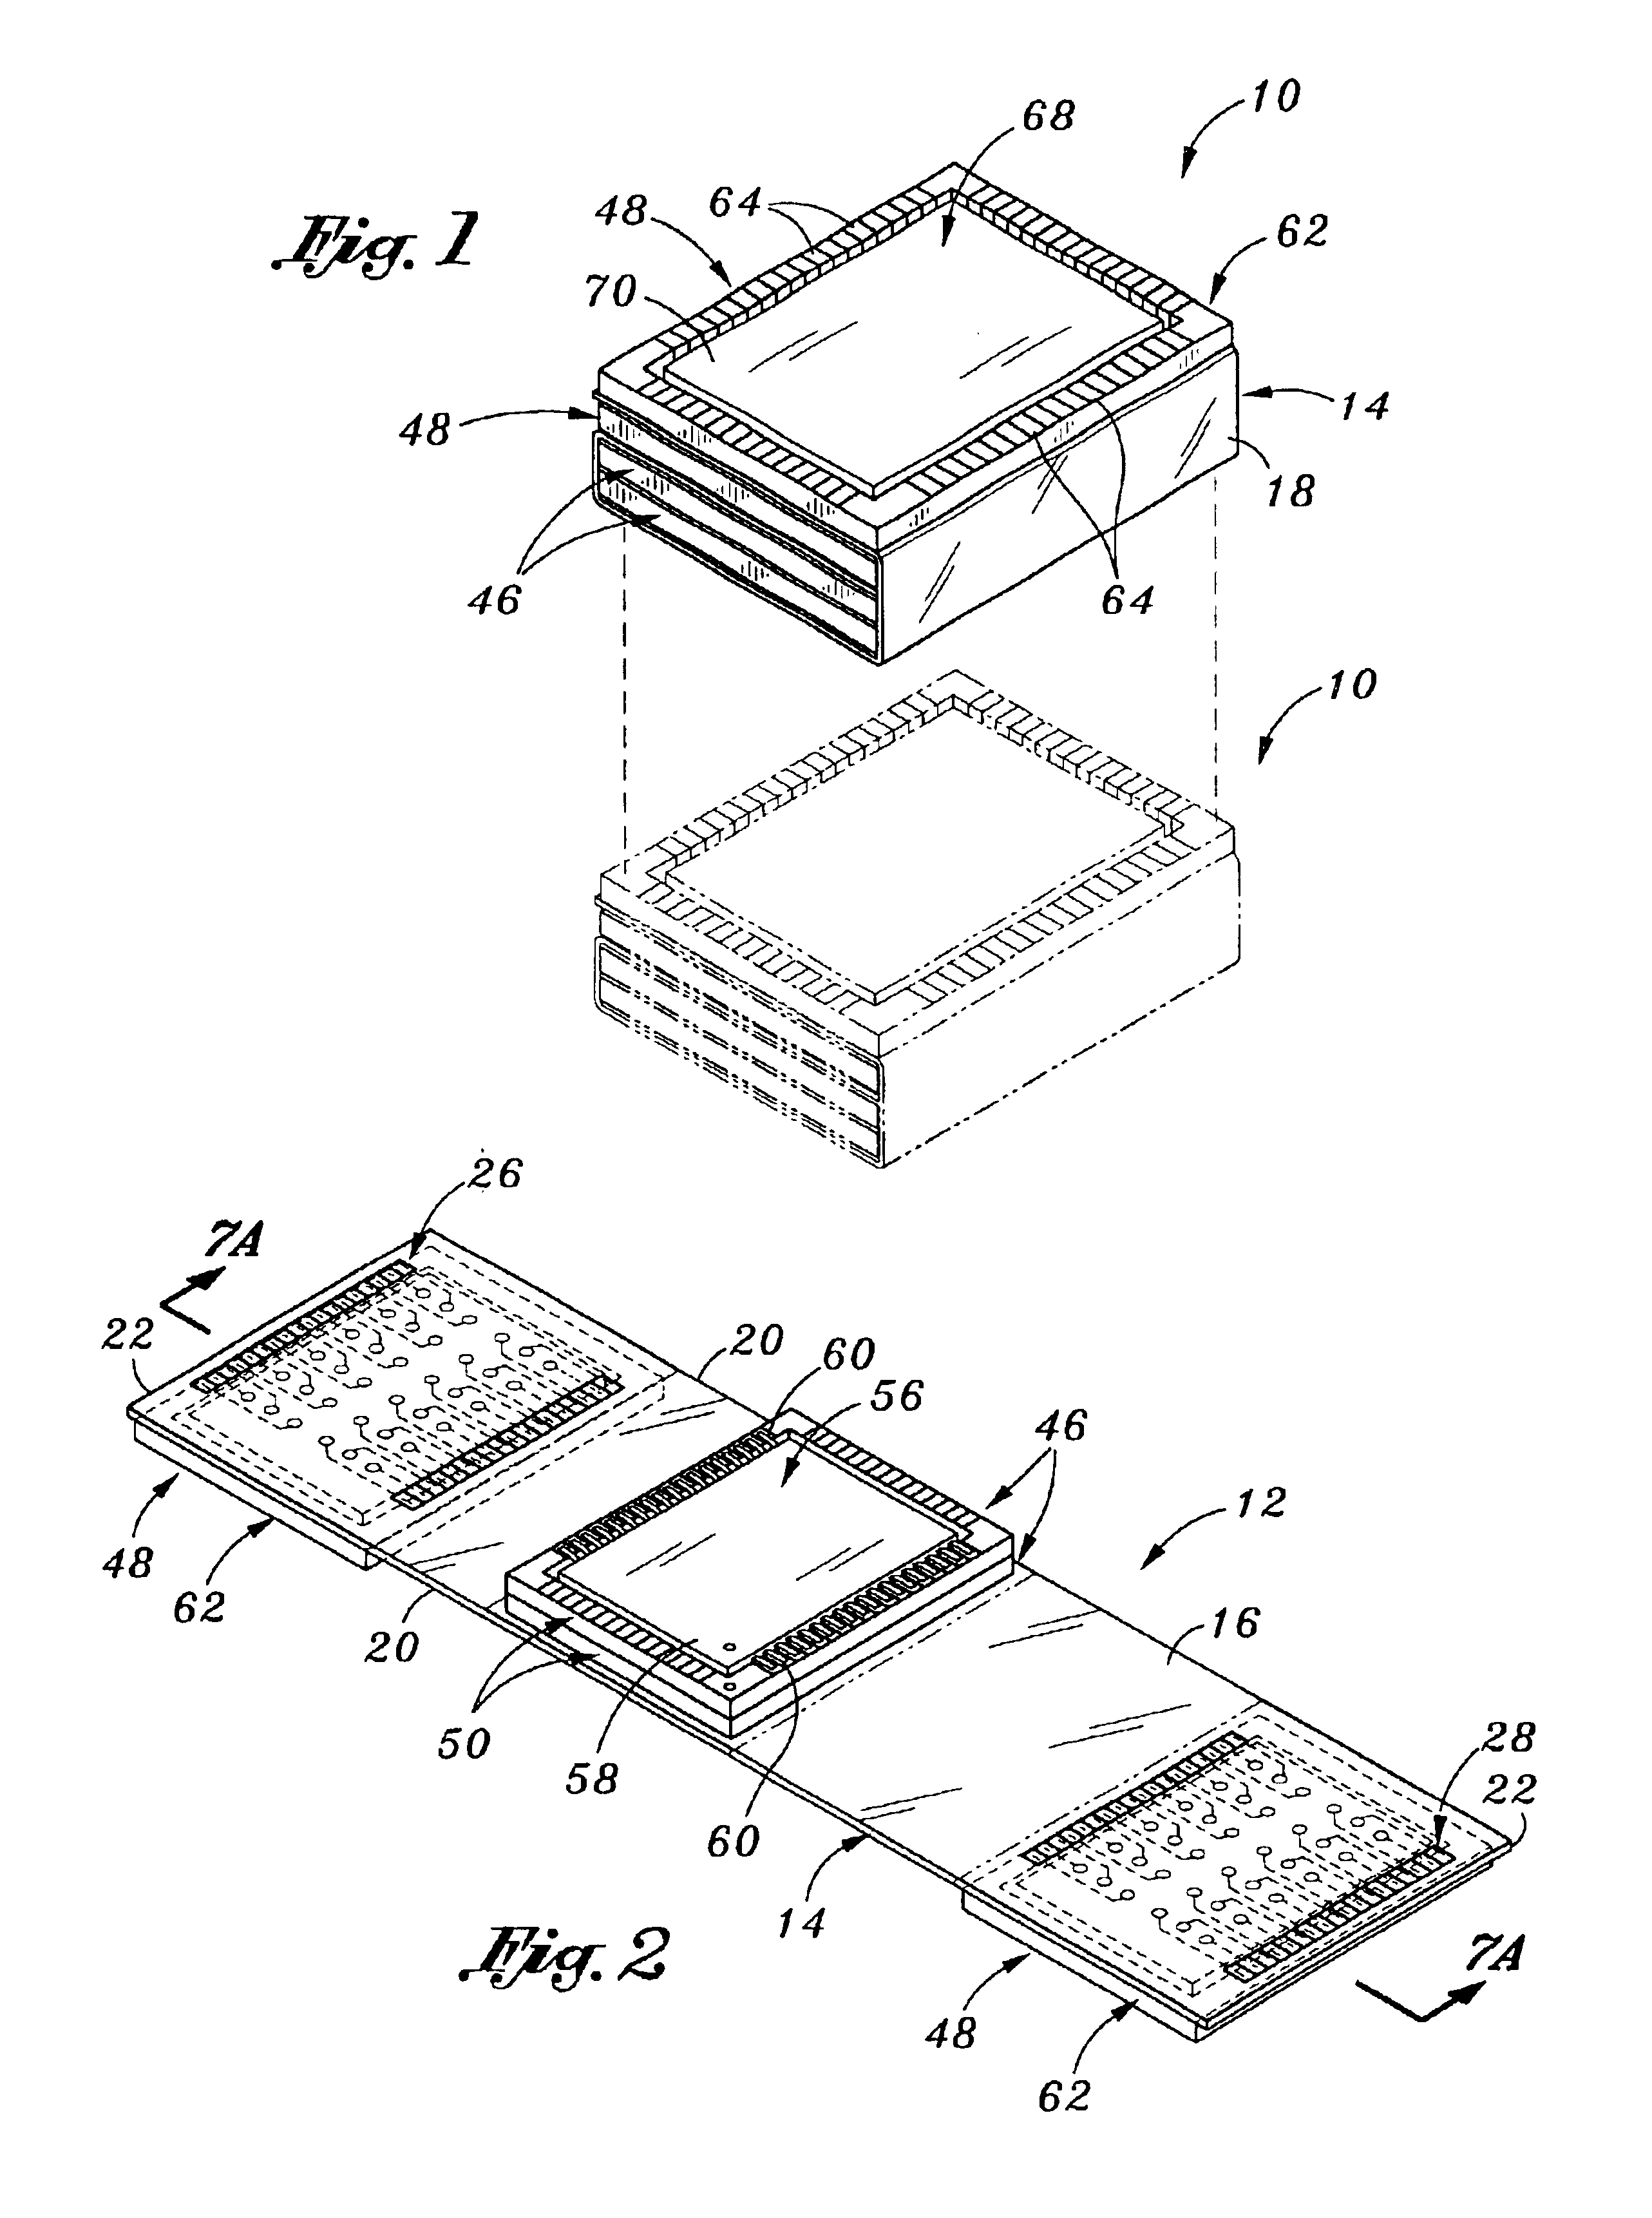 Chip stack with differing chip package types